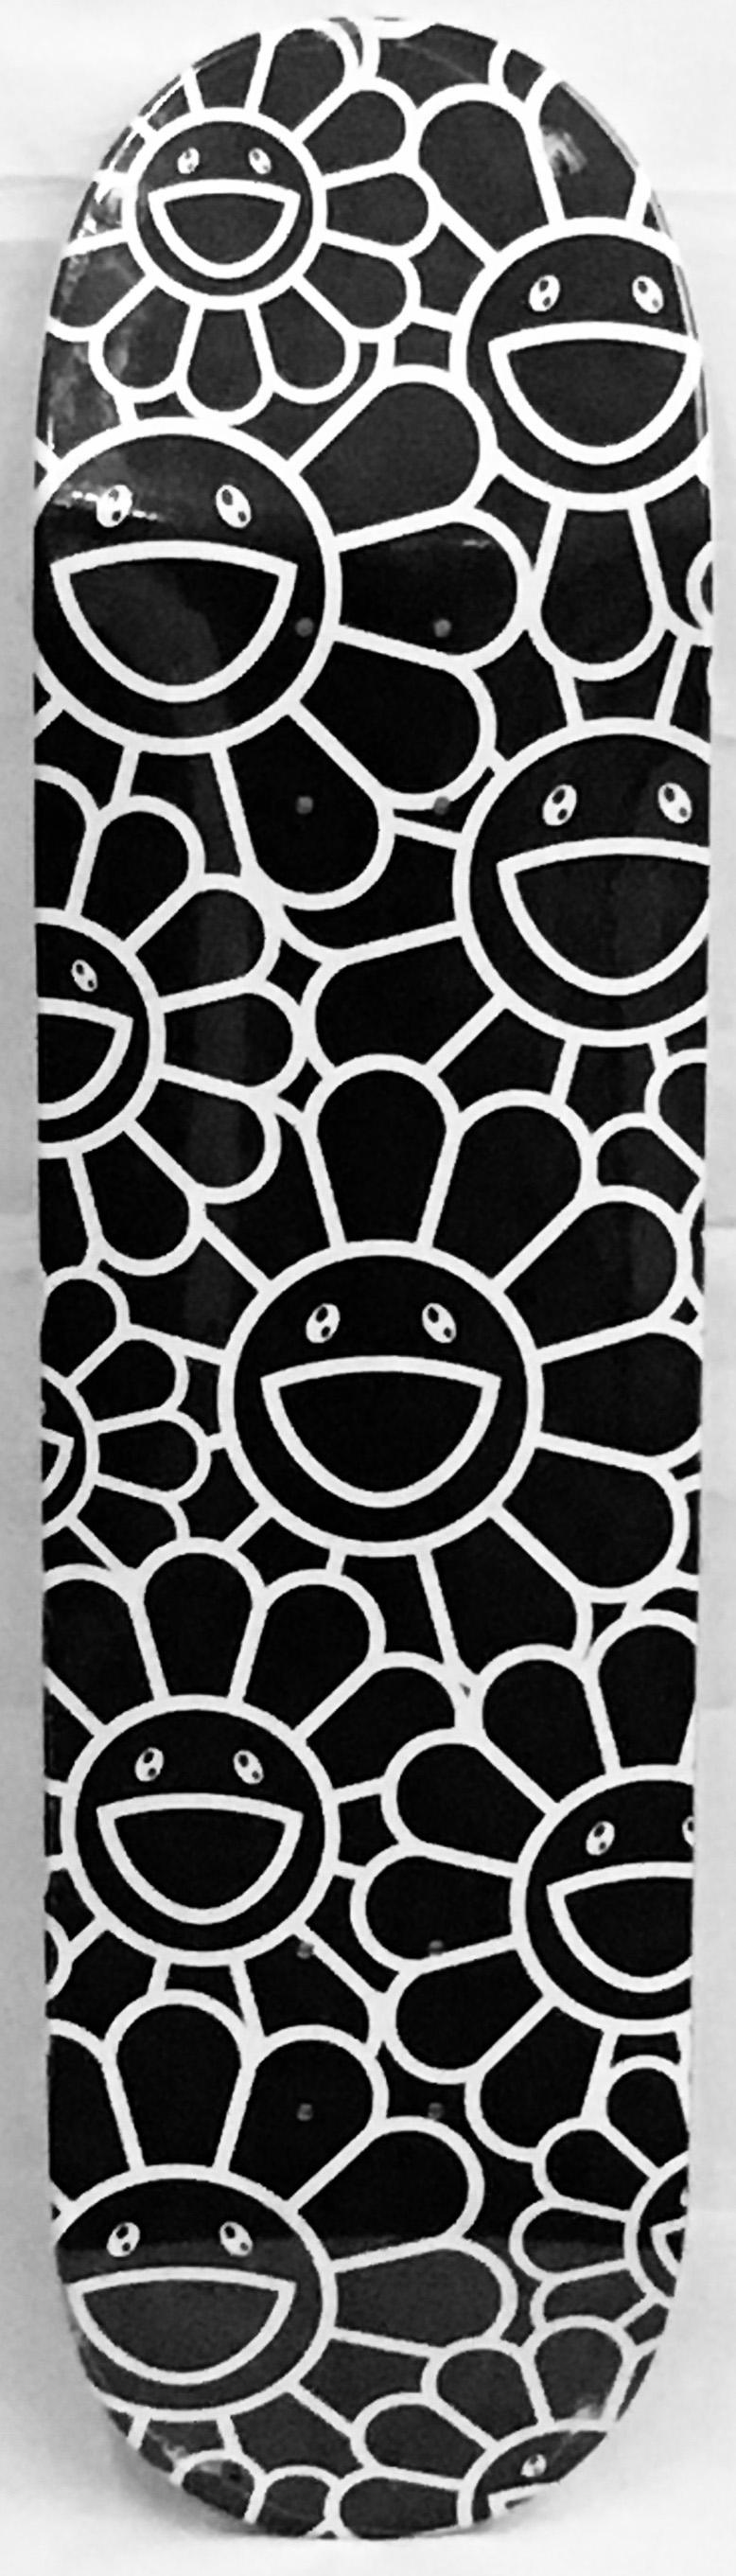 Murakami Flowers Skate Deck (Black and White)
A vibrant piece of Takashi Murakami wall art produced as a limited series in conjunction with the 2017 Murakami exhibit: The Octopus Eats Its Own Leg, MCA Chicago. This deck is new in its original